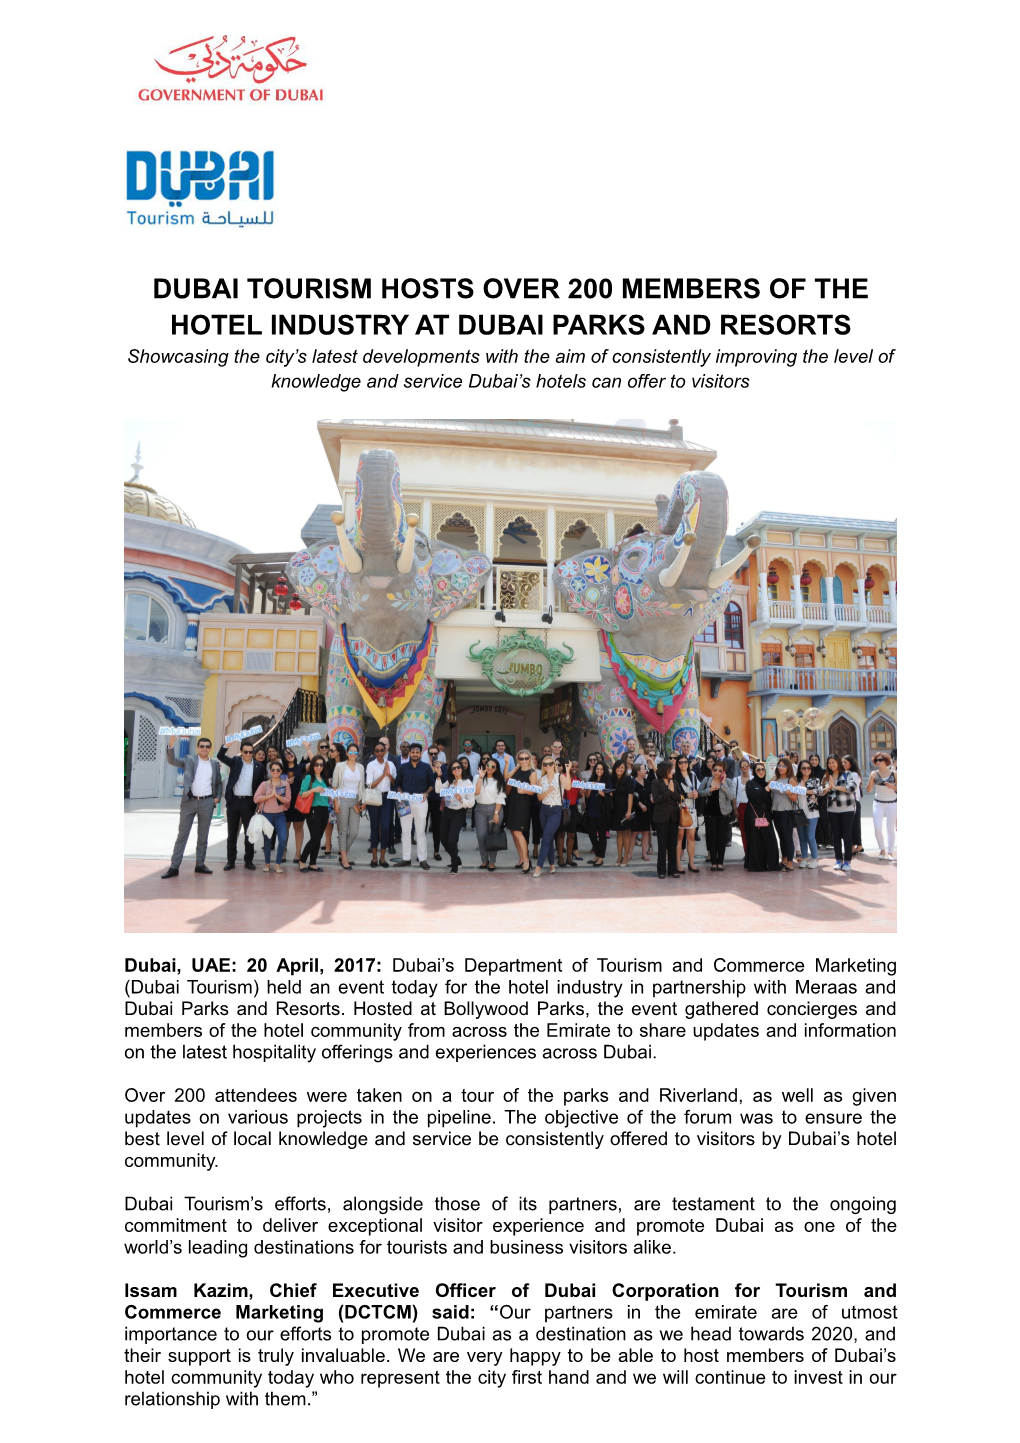 Dubai Tourism Hosts OVER 200 Members of the Hotel Industry at Dubai Parks and RESORTS